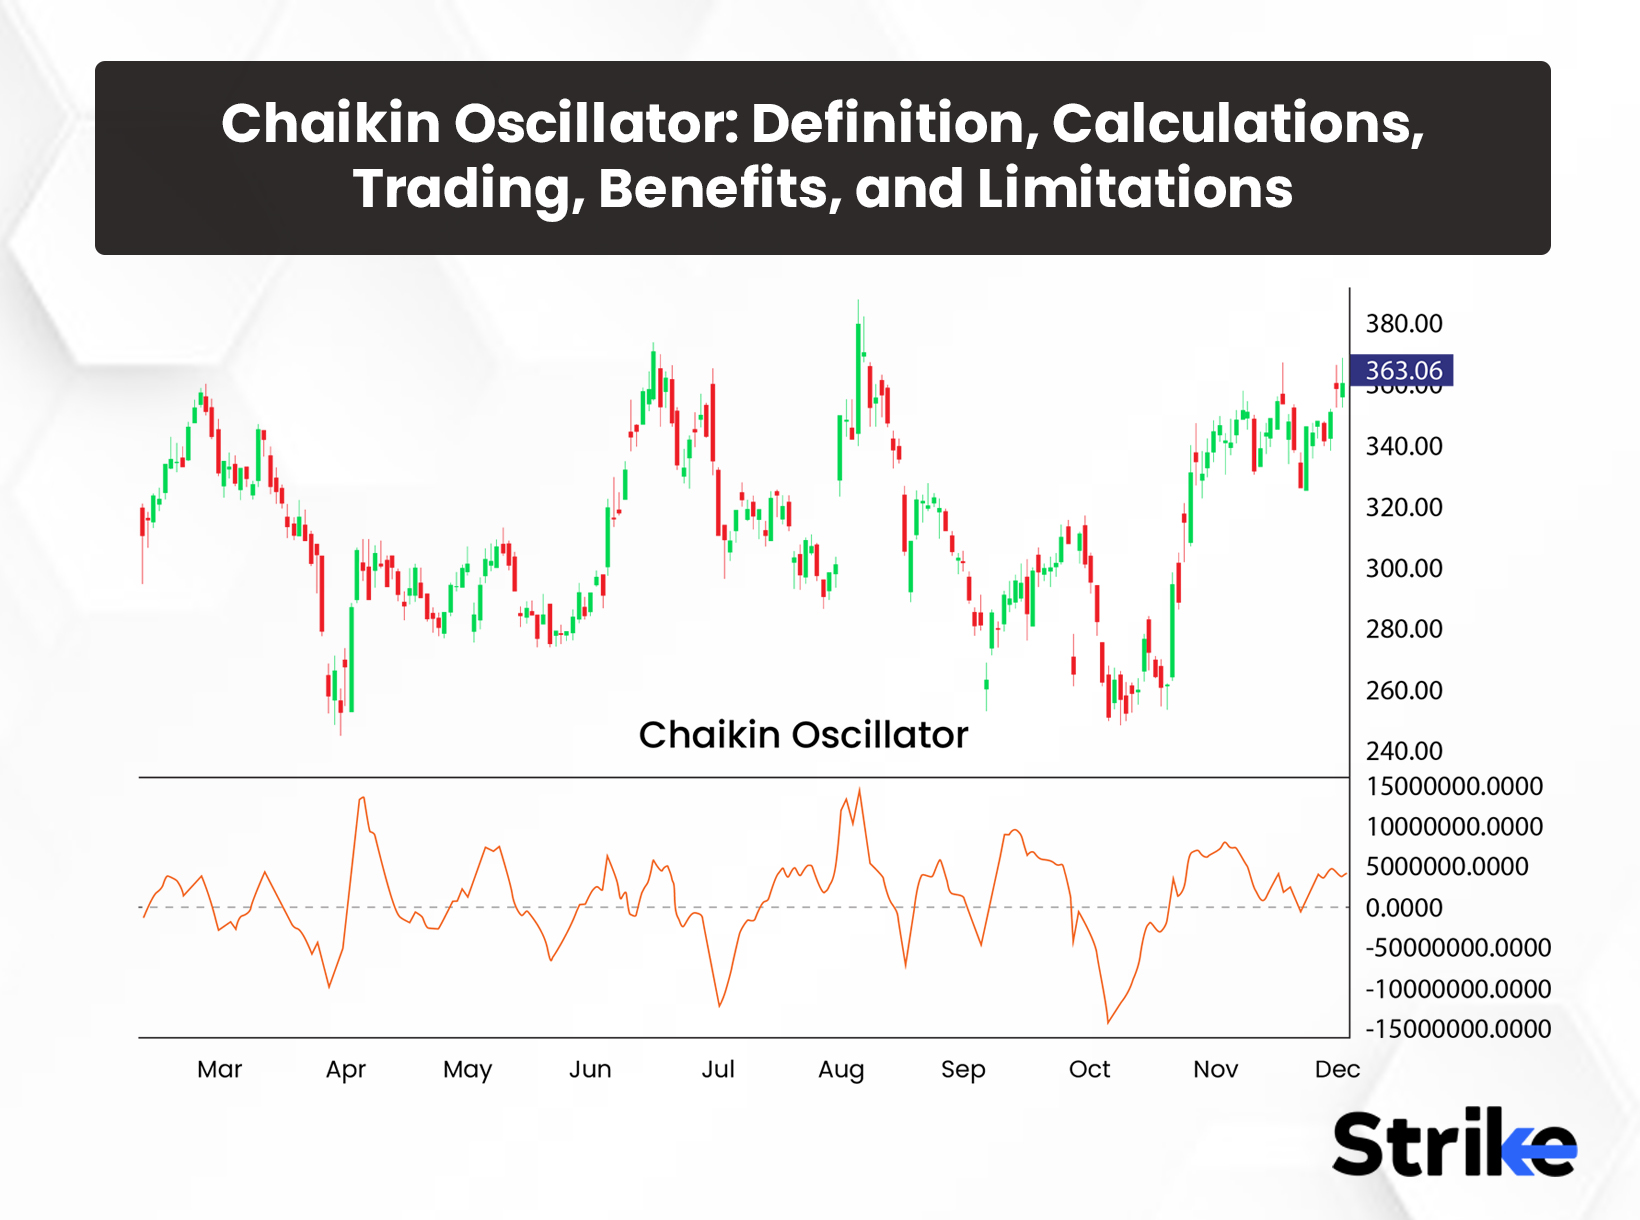 Chaikin Oscillator: Definition, Calculations, Trading, Benefits, and Limitations